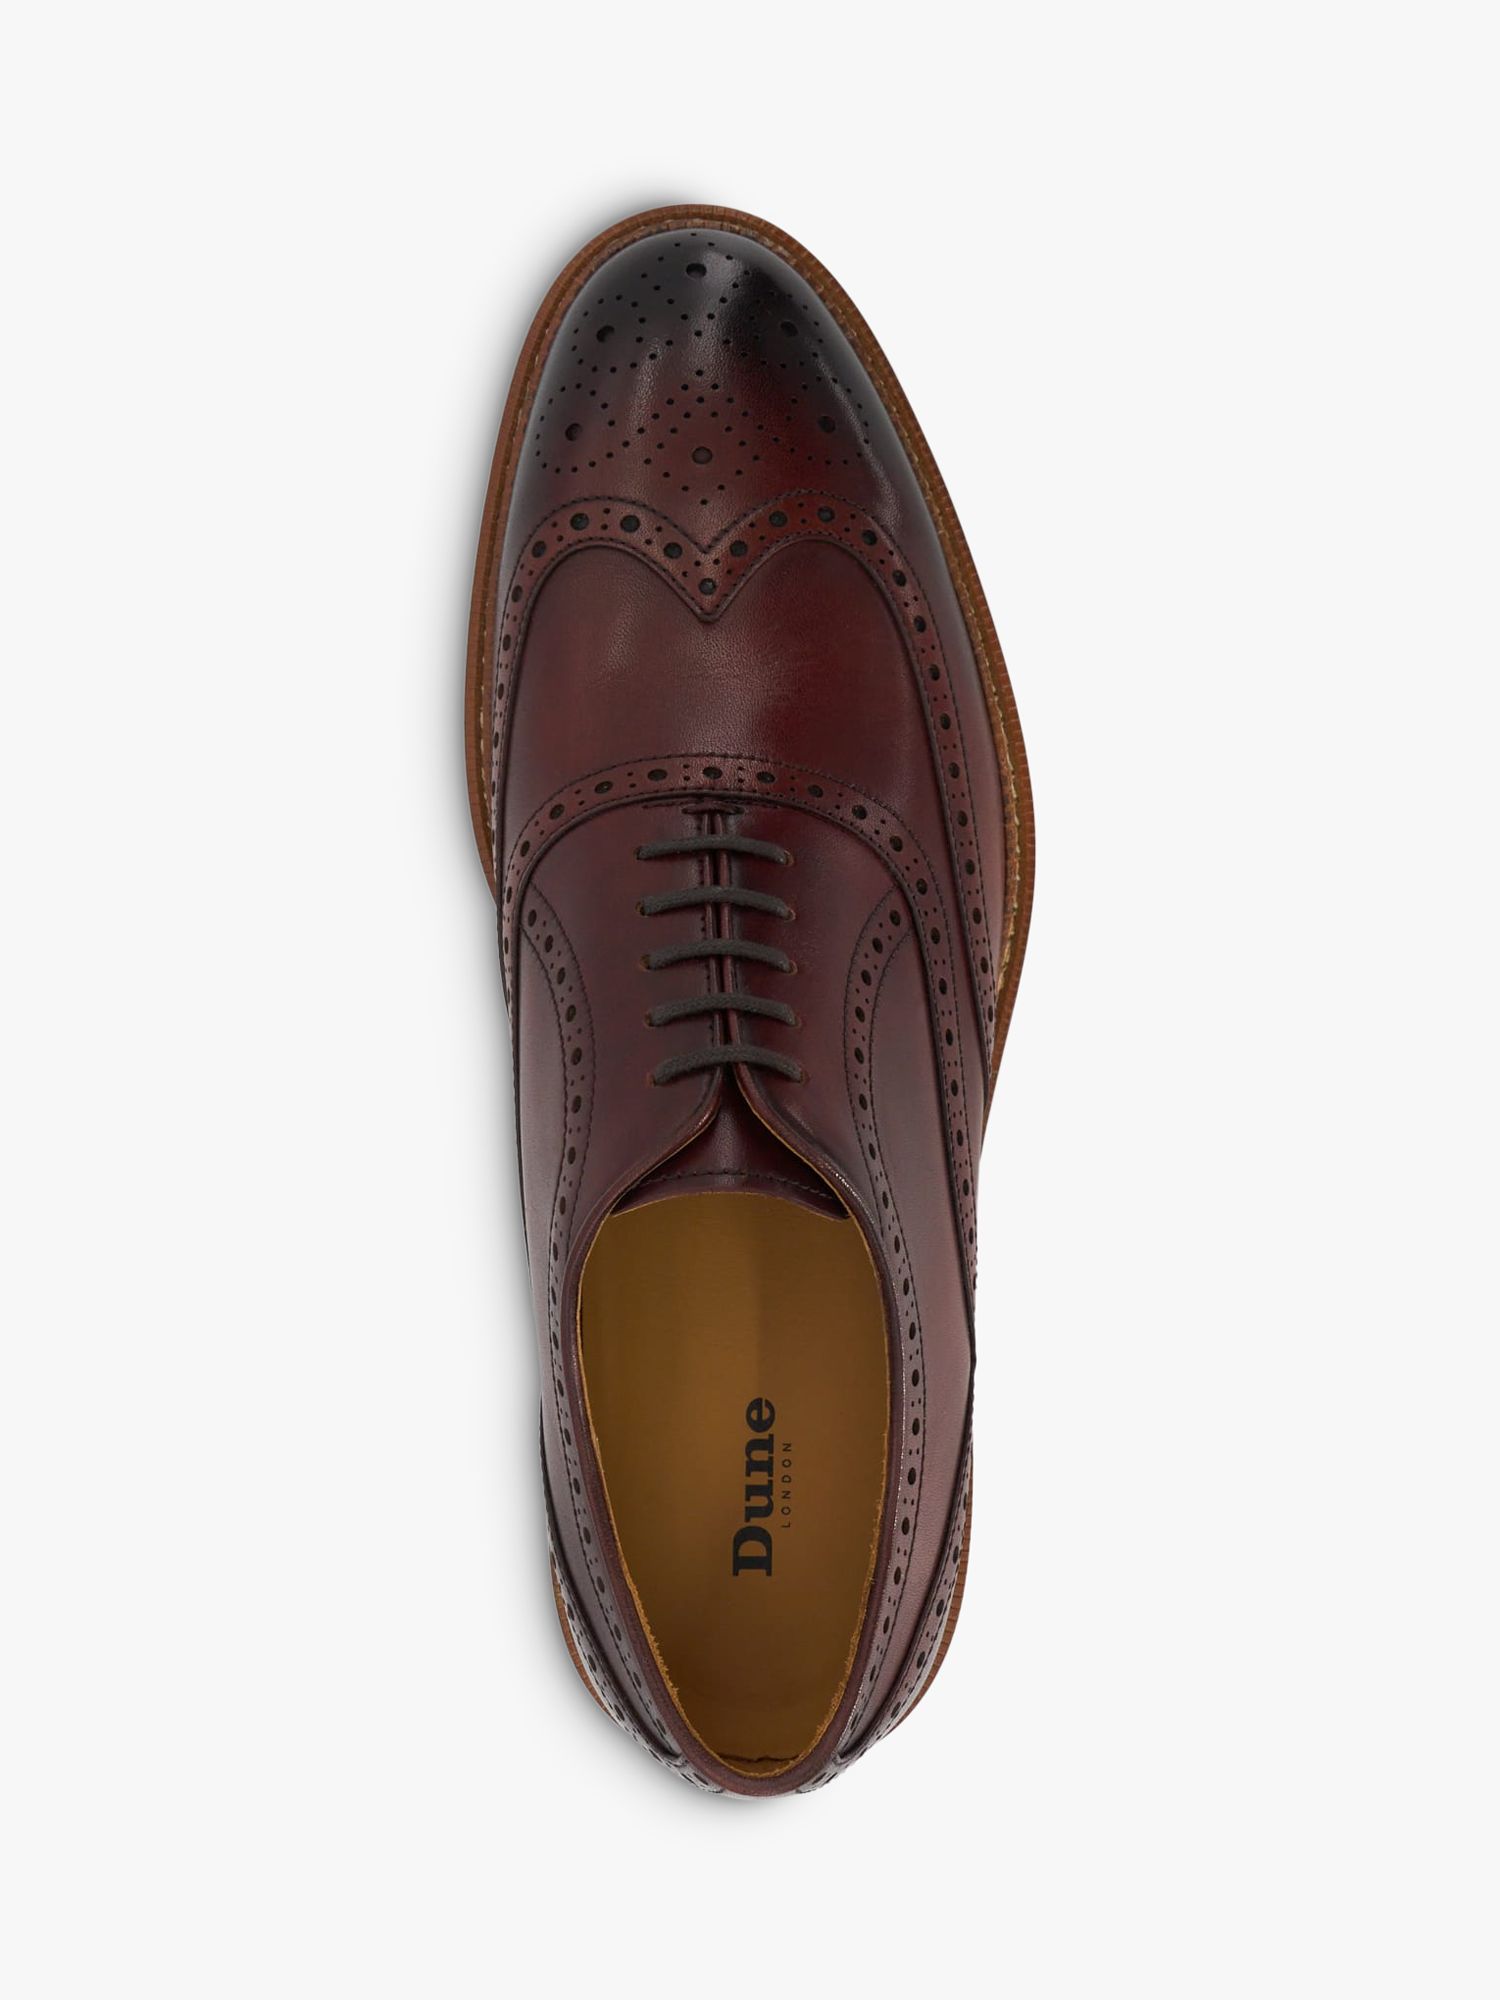 Dune Solihull Brogue Leather Oxford Shoes, Bordeaux, 6